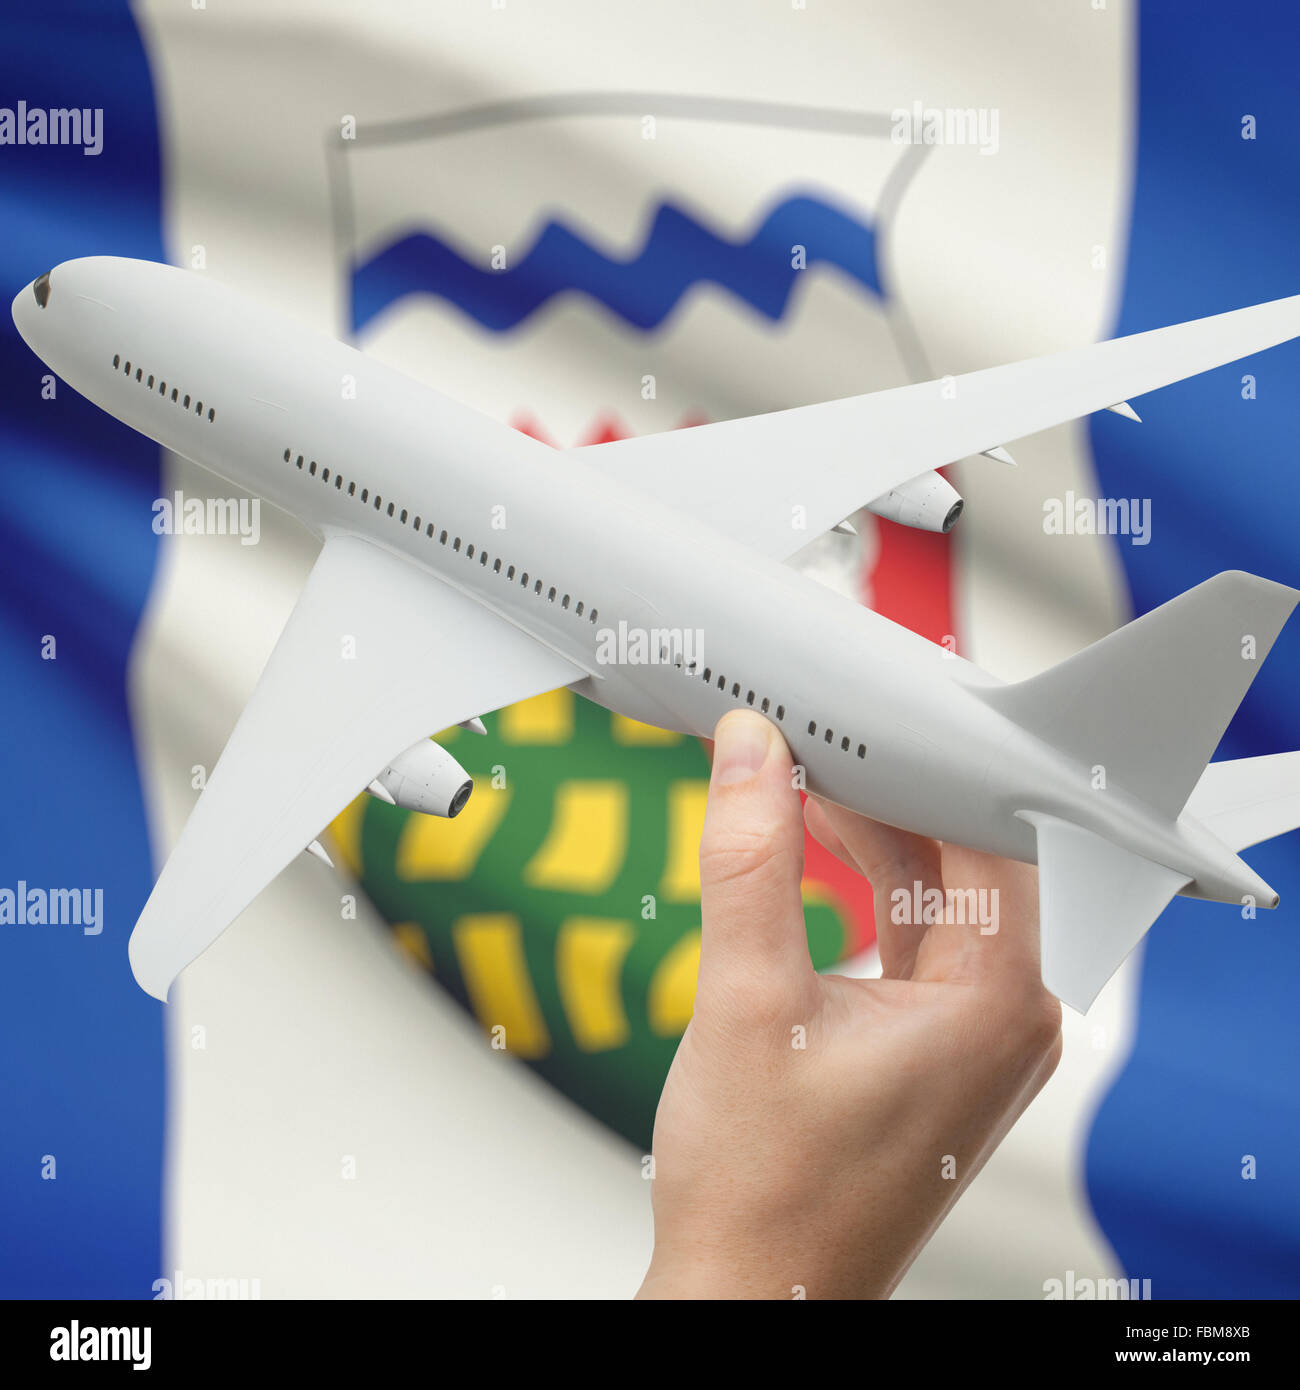 Airplane in hand with Canadian province or territory flag on background series - Northwest Territories Stock Photo